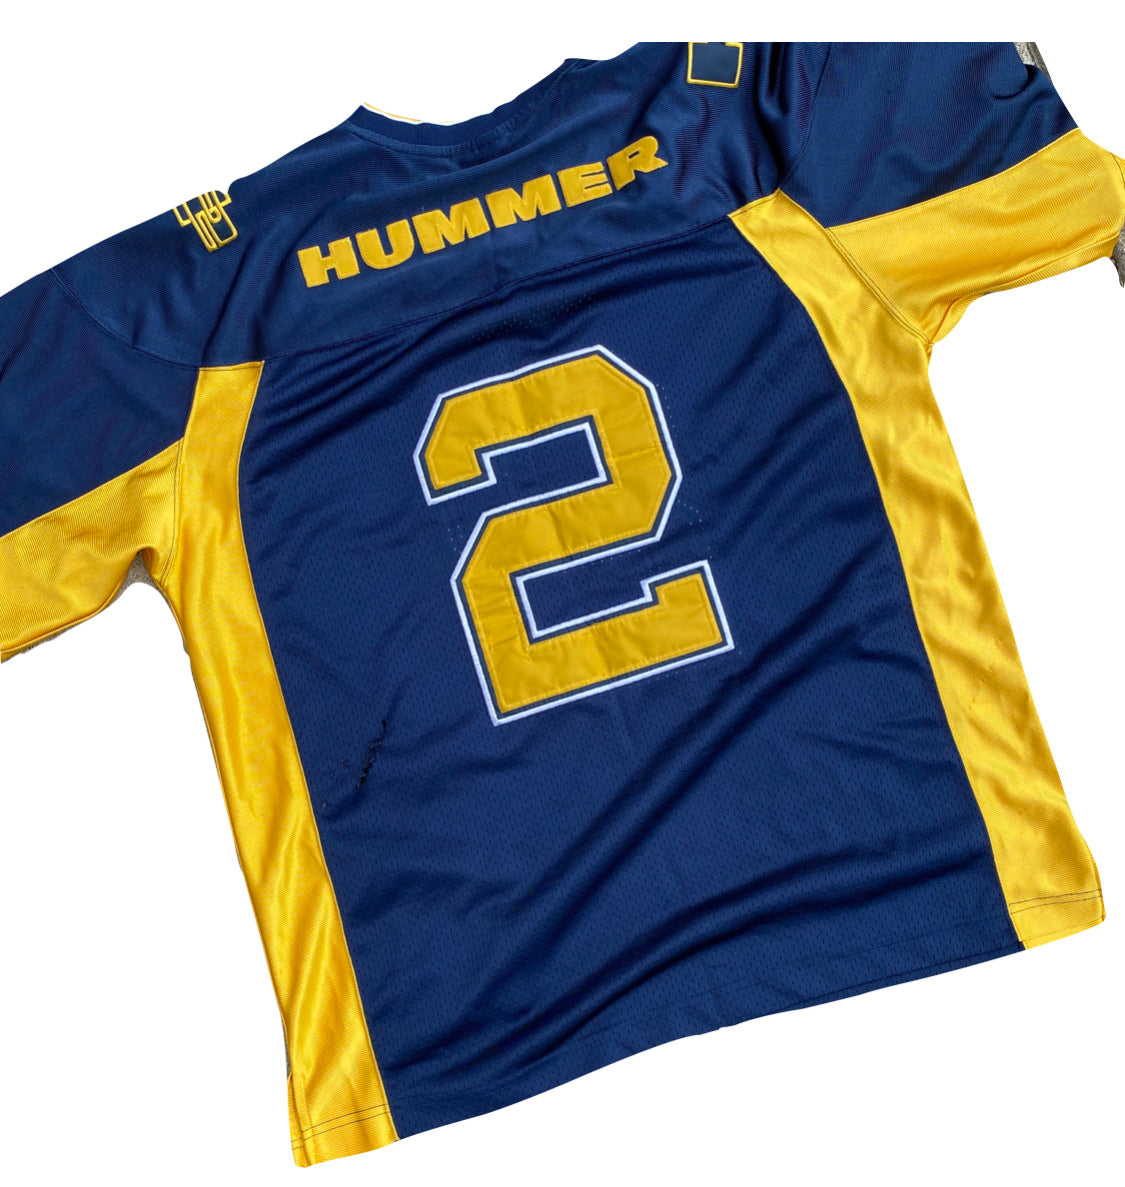 HUMMER H2 jersey. the back has a slice mark/hole. L/XL